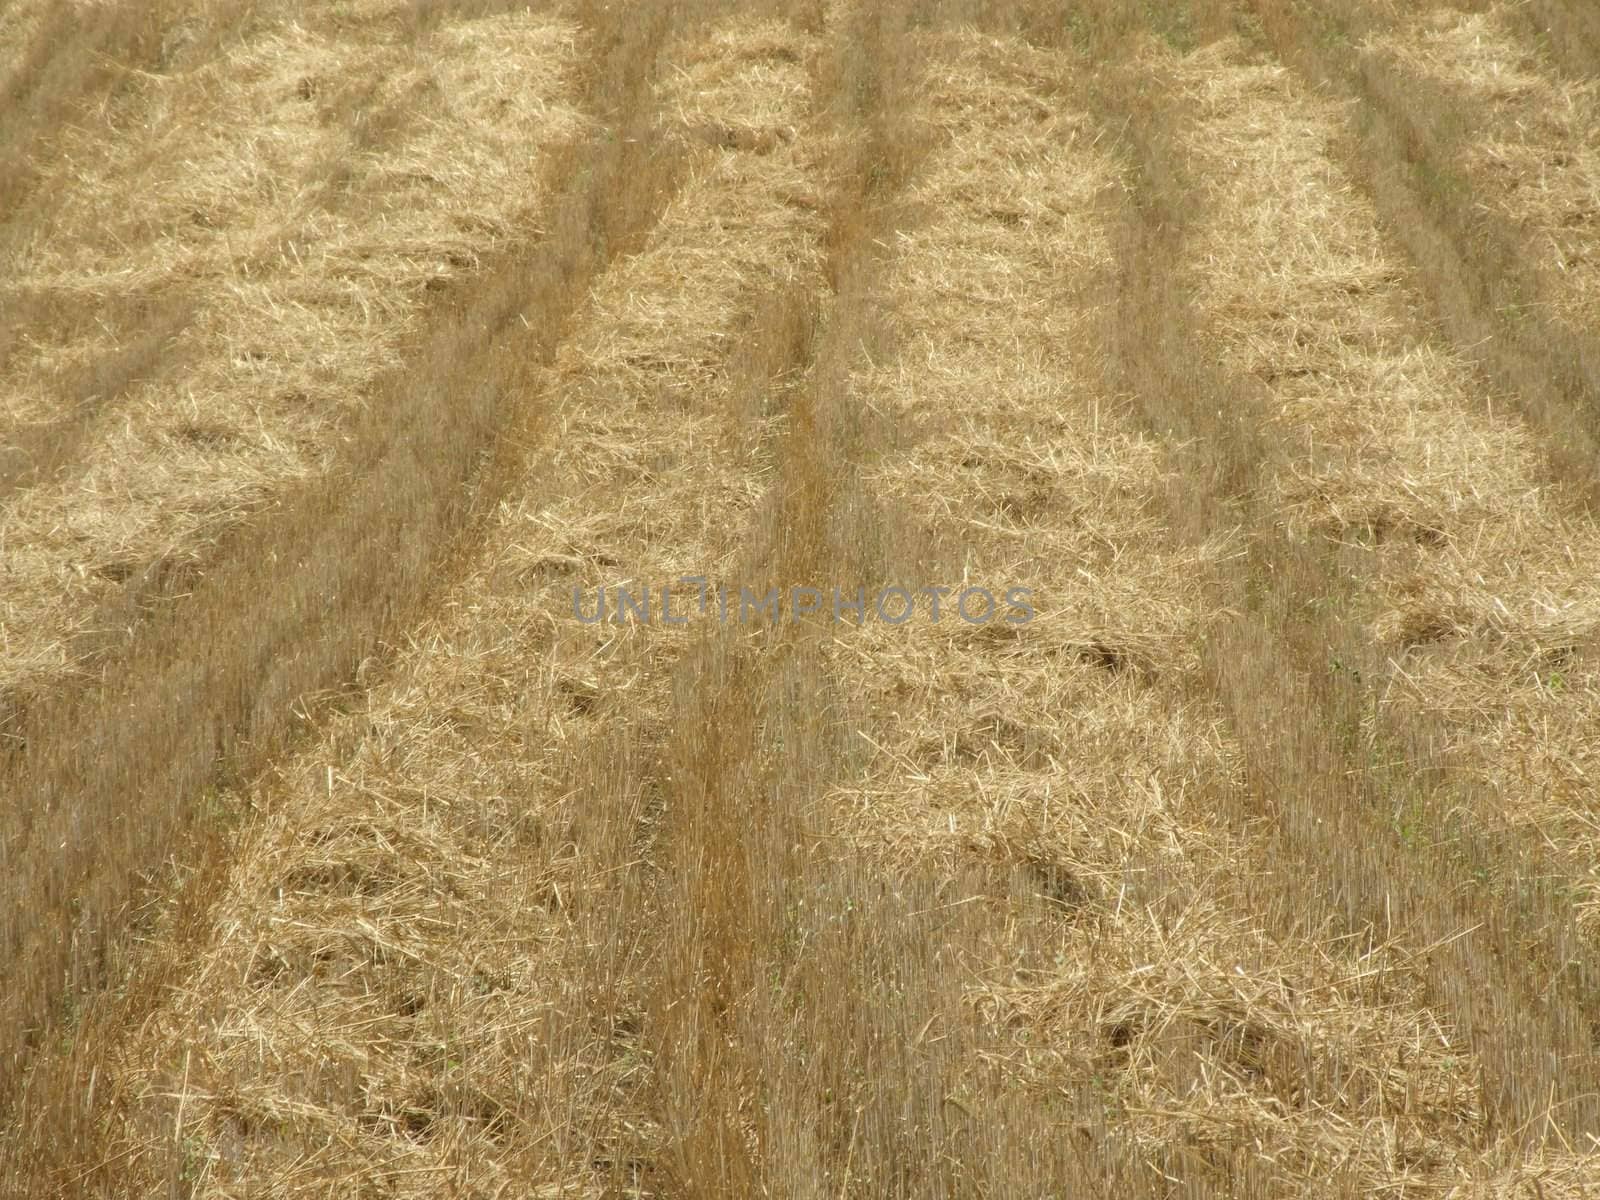 Field of wheat after harvest